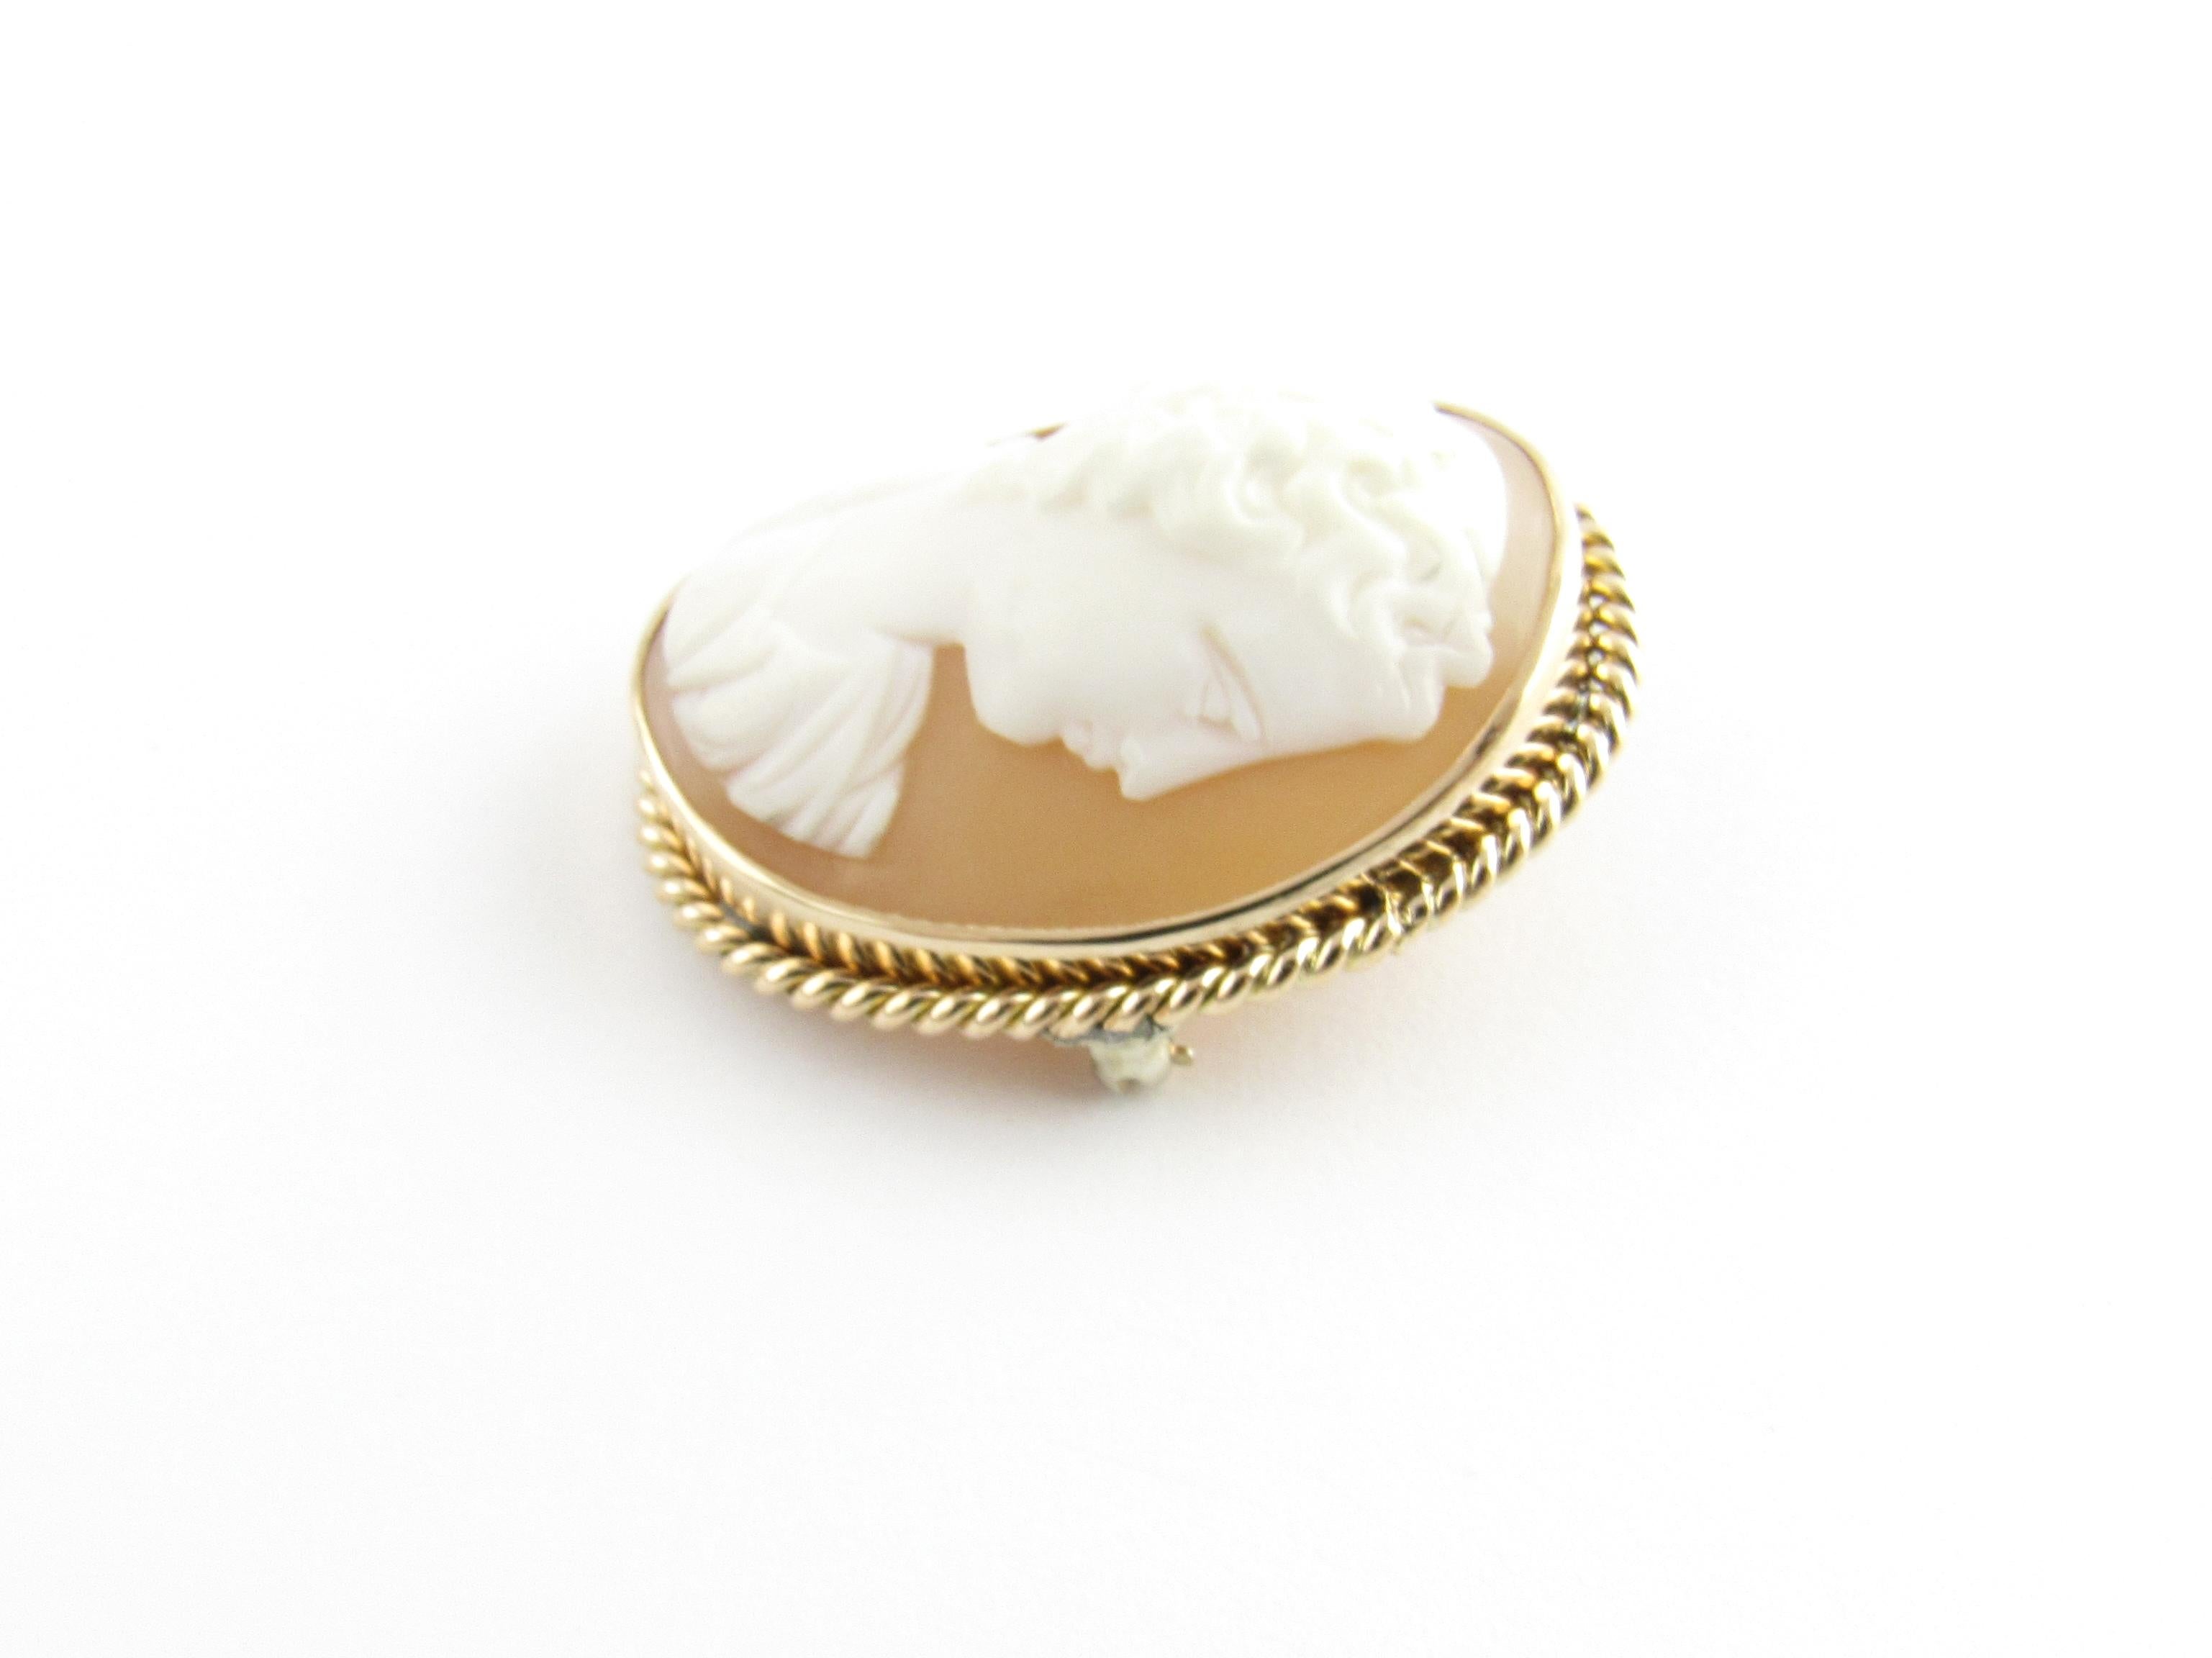 Vintage 10 Karat Yellow Gold Cameo Brooch / Pin

This lovely cameo pin features a lovely lady in profile framed in beautifully detailed 10K yellow gold.

Size: 34 mm x 28 mm

Weight: 6.1 dwt. / 9.5 gr.

Acid tested for 10K gold.

Very good